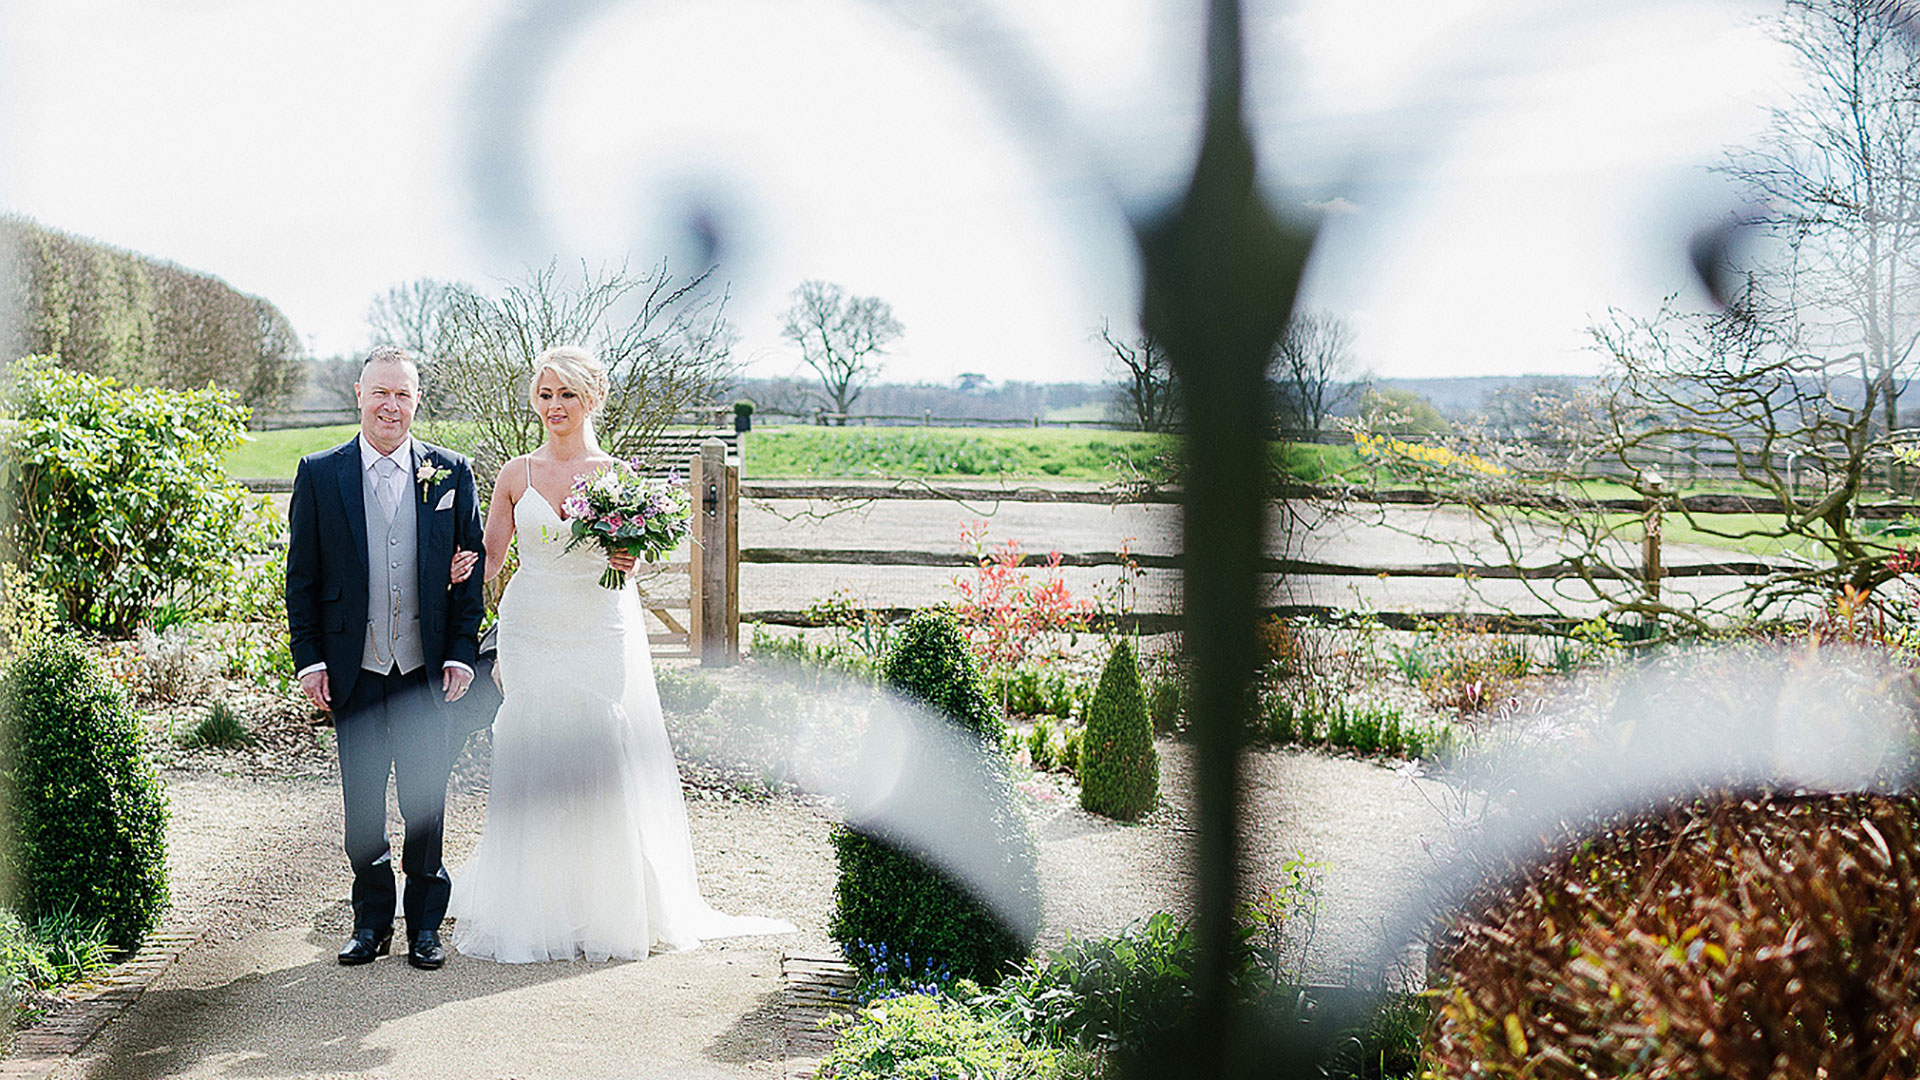 A bride and her father begin their walk down the wedding aisle - wedding ceremony venues in Essex